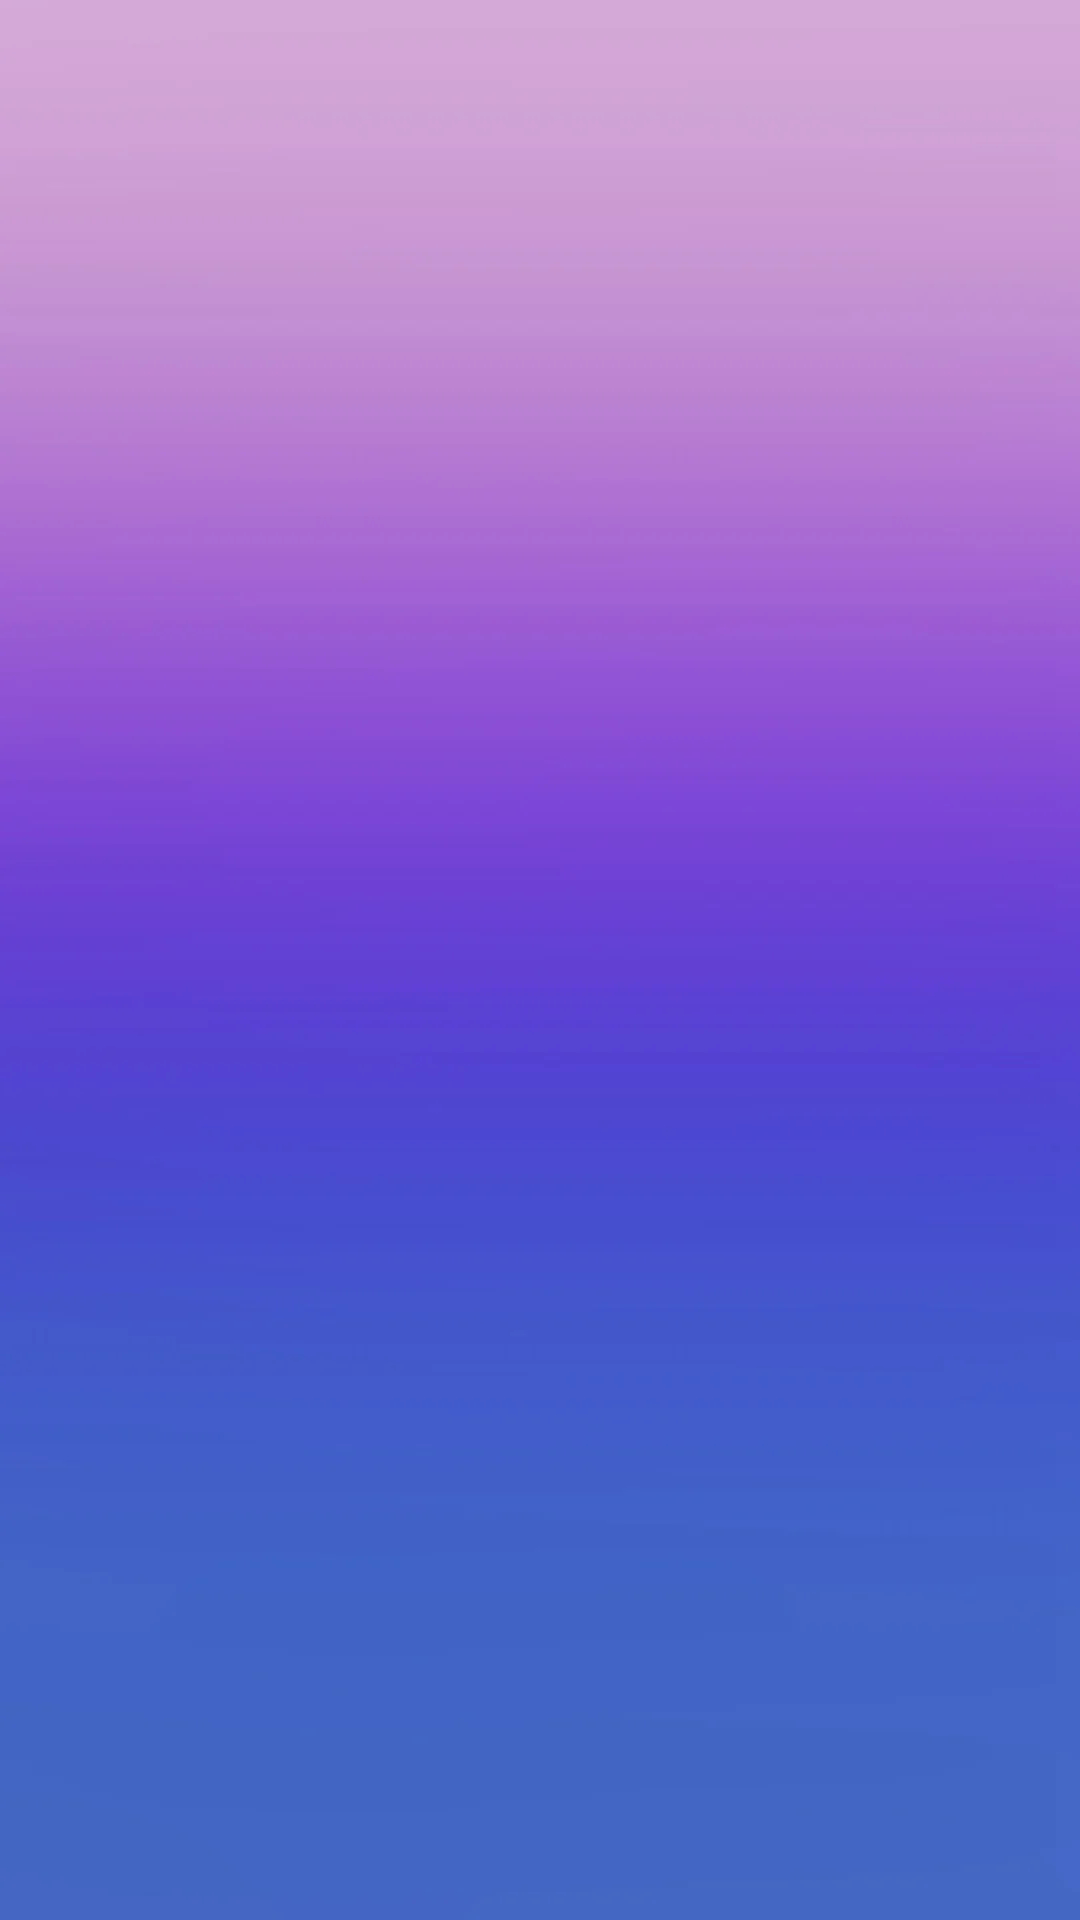 1080x1920 Purple and Blue Ombre Wallpapers Top Free Purple and Blue Ombre Backgrounds